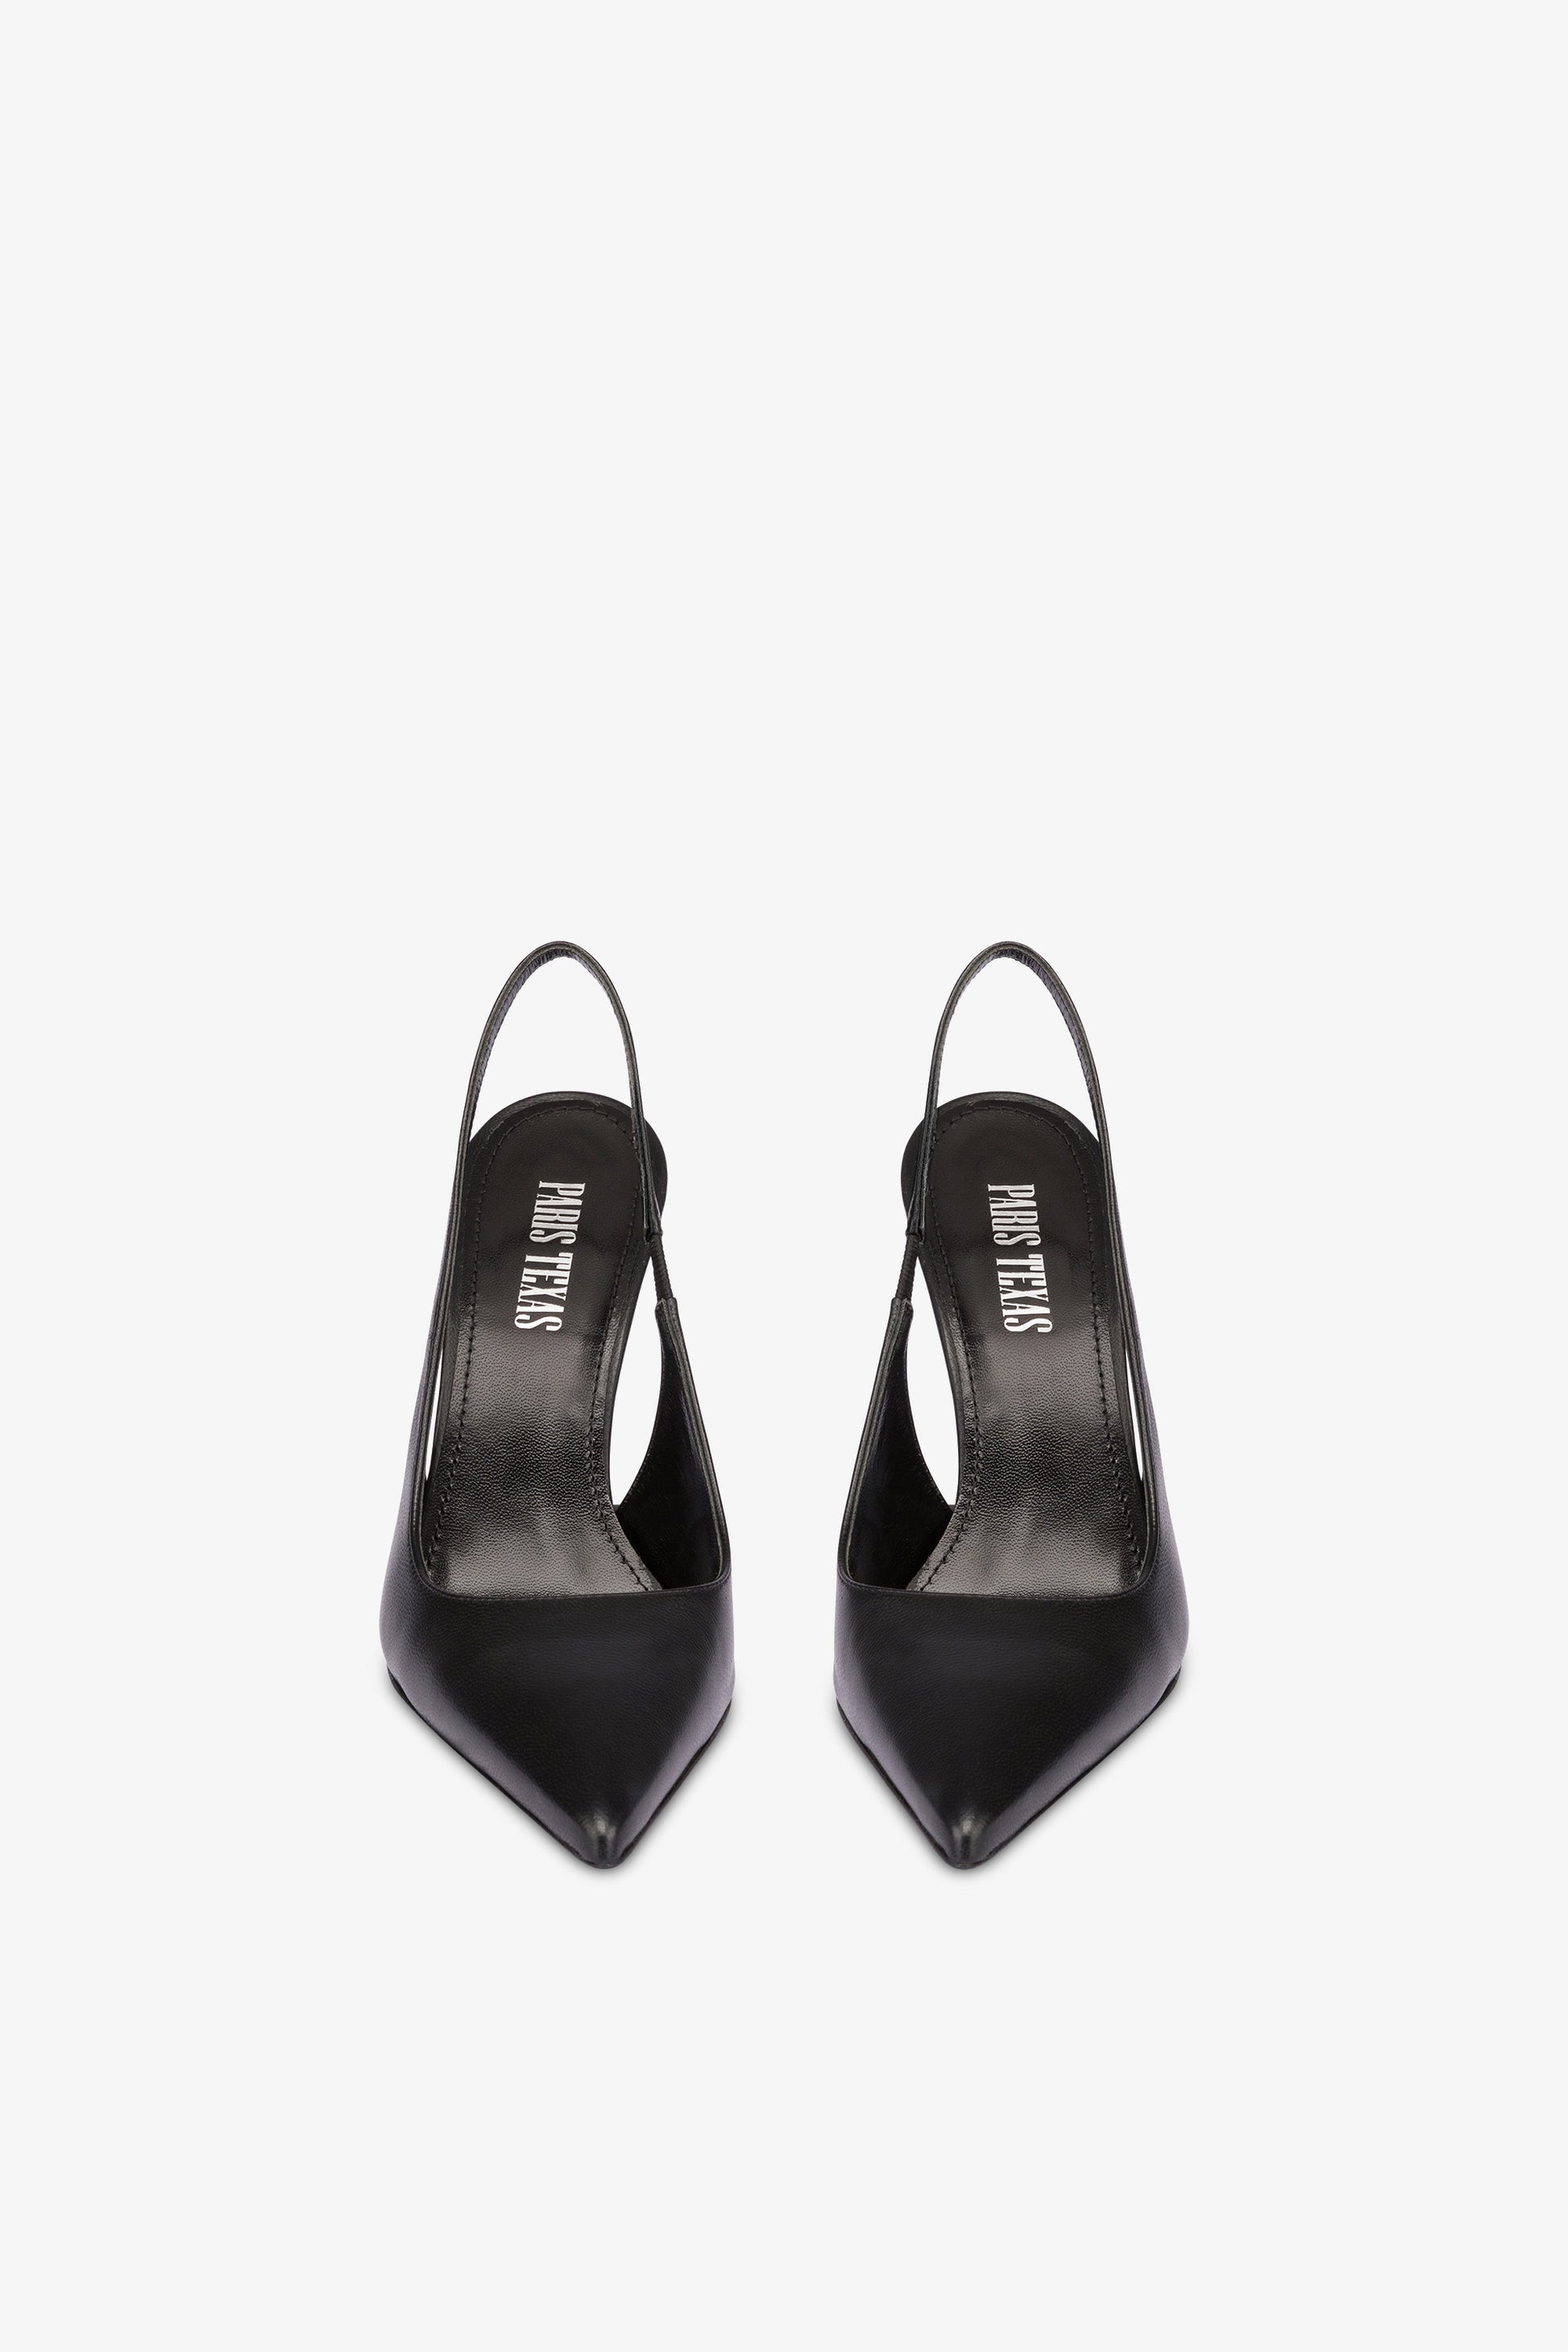 Sharp, pointed slingbacks in smooth black leather